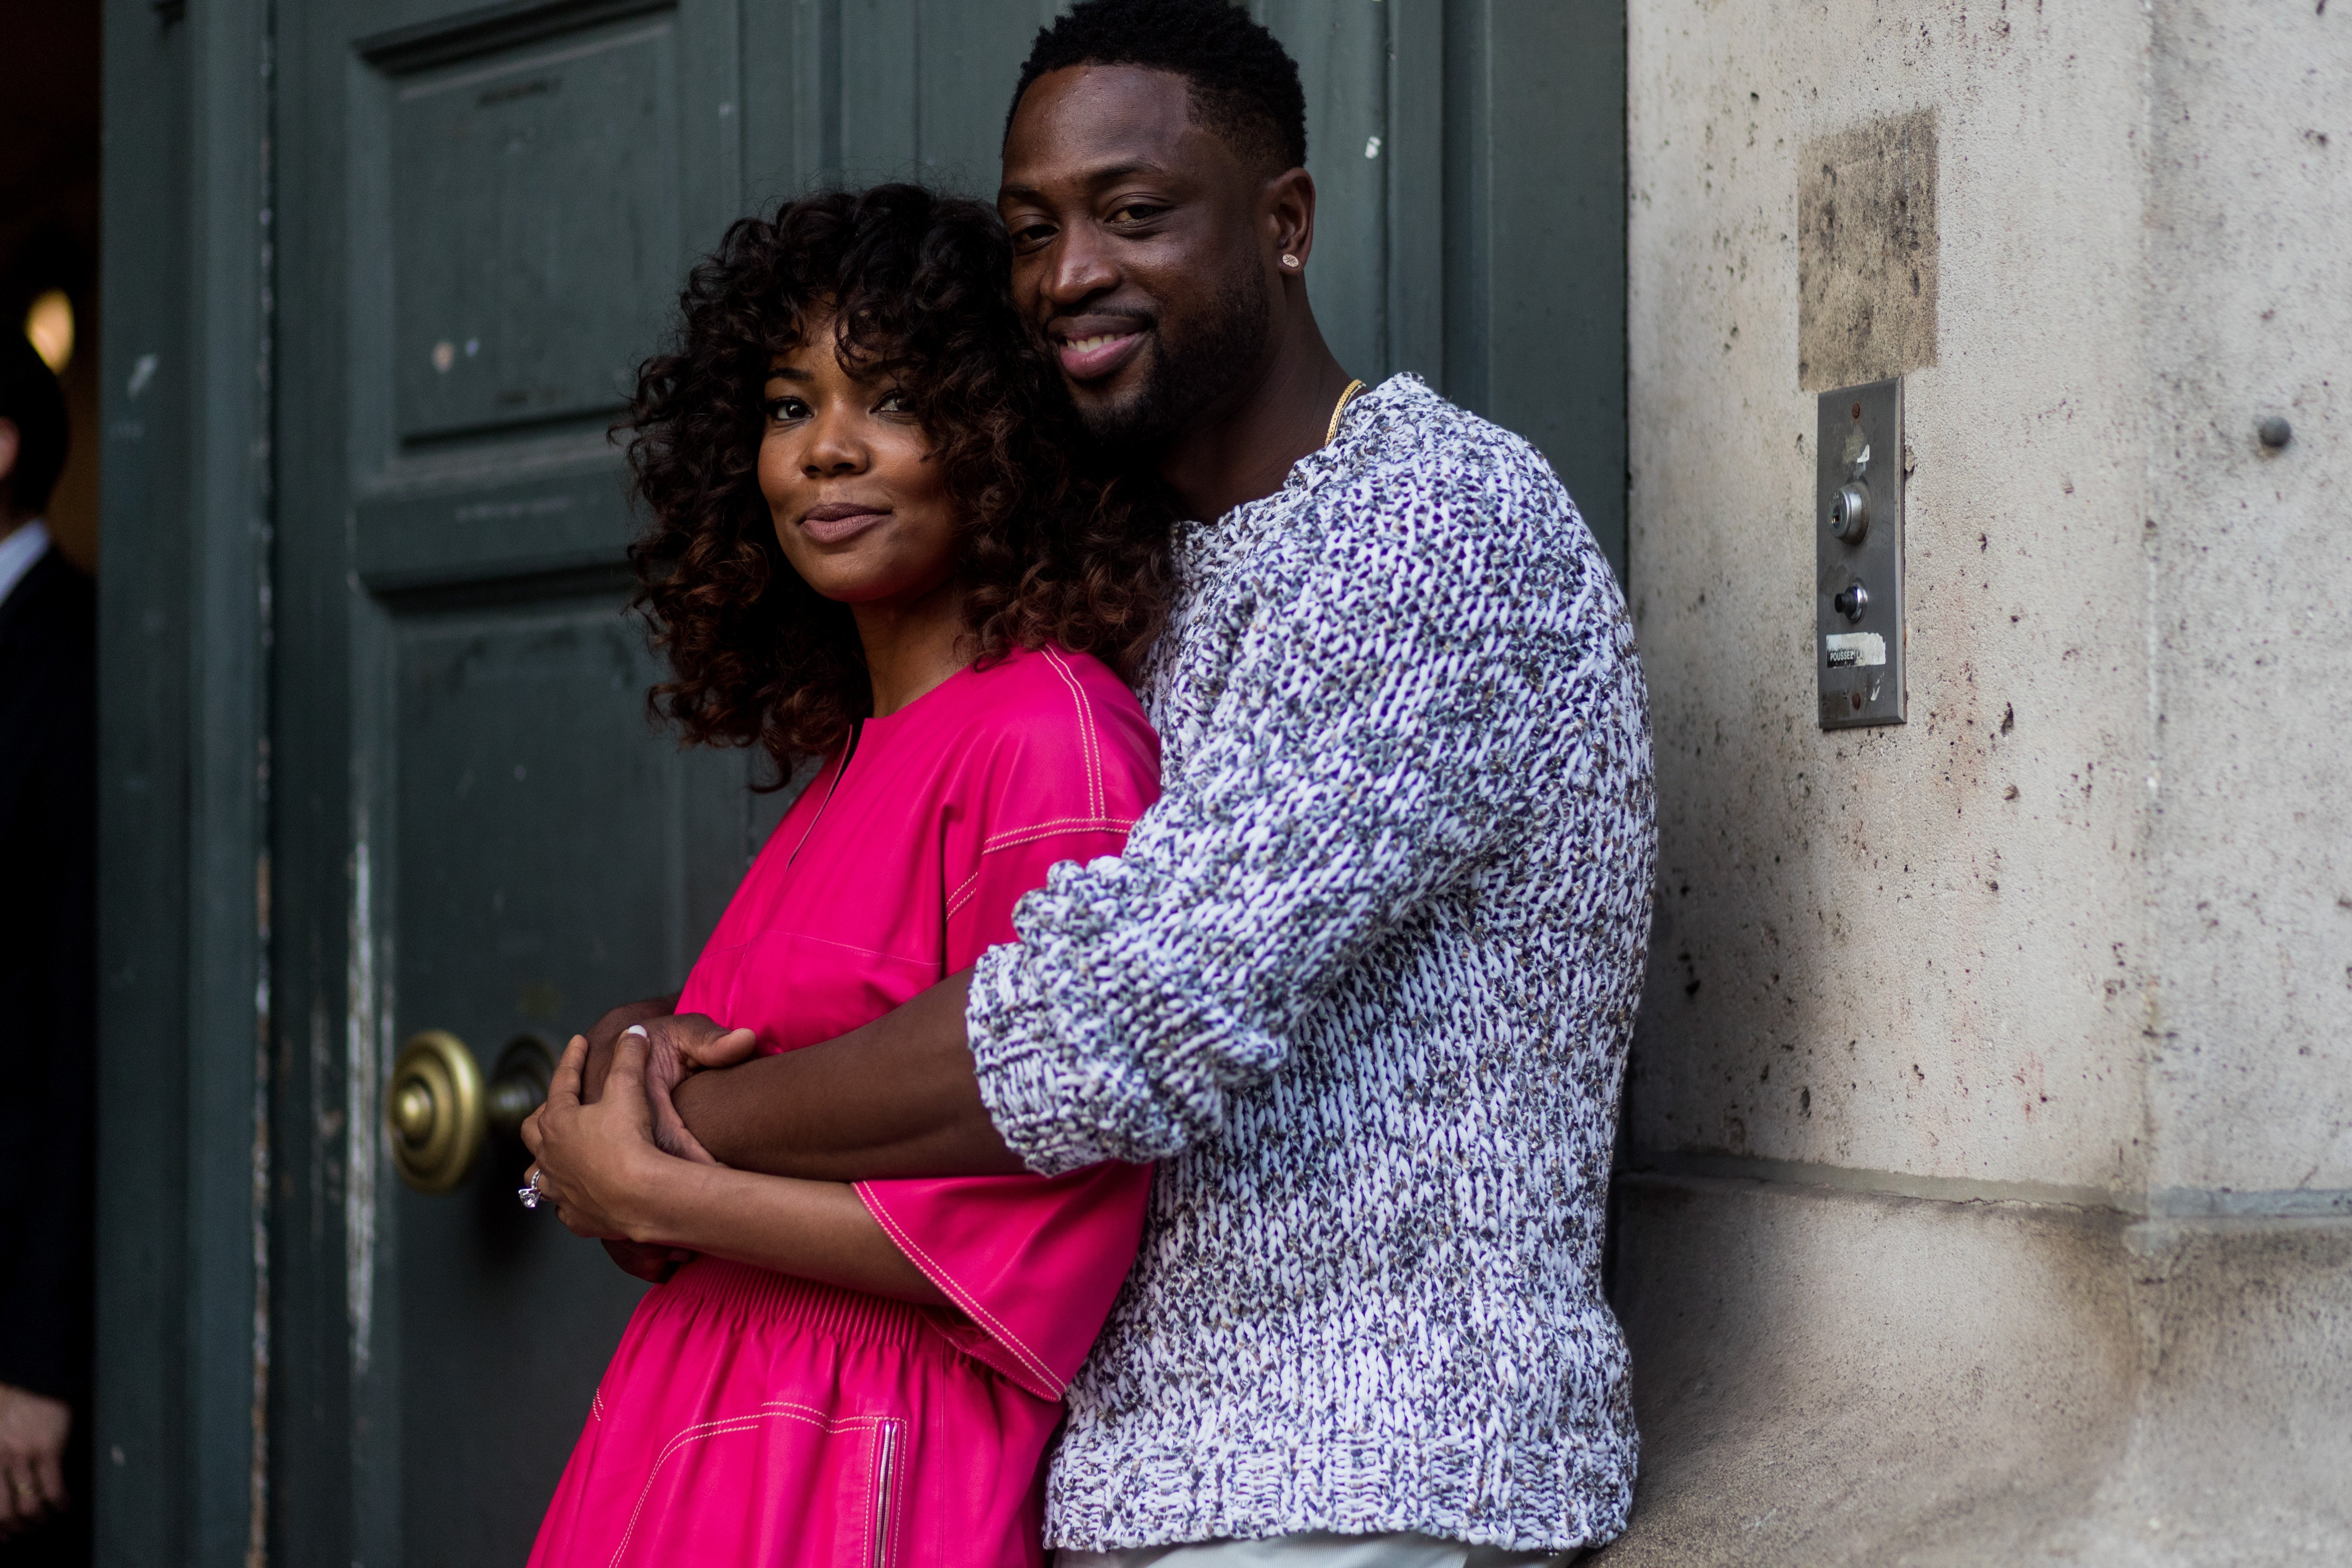 Gabrielle Union & Dwyane Wade hugging outside a Hermes store during Paris Fashion Week in June 2017. | Photo: Getty Images